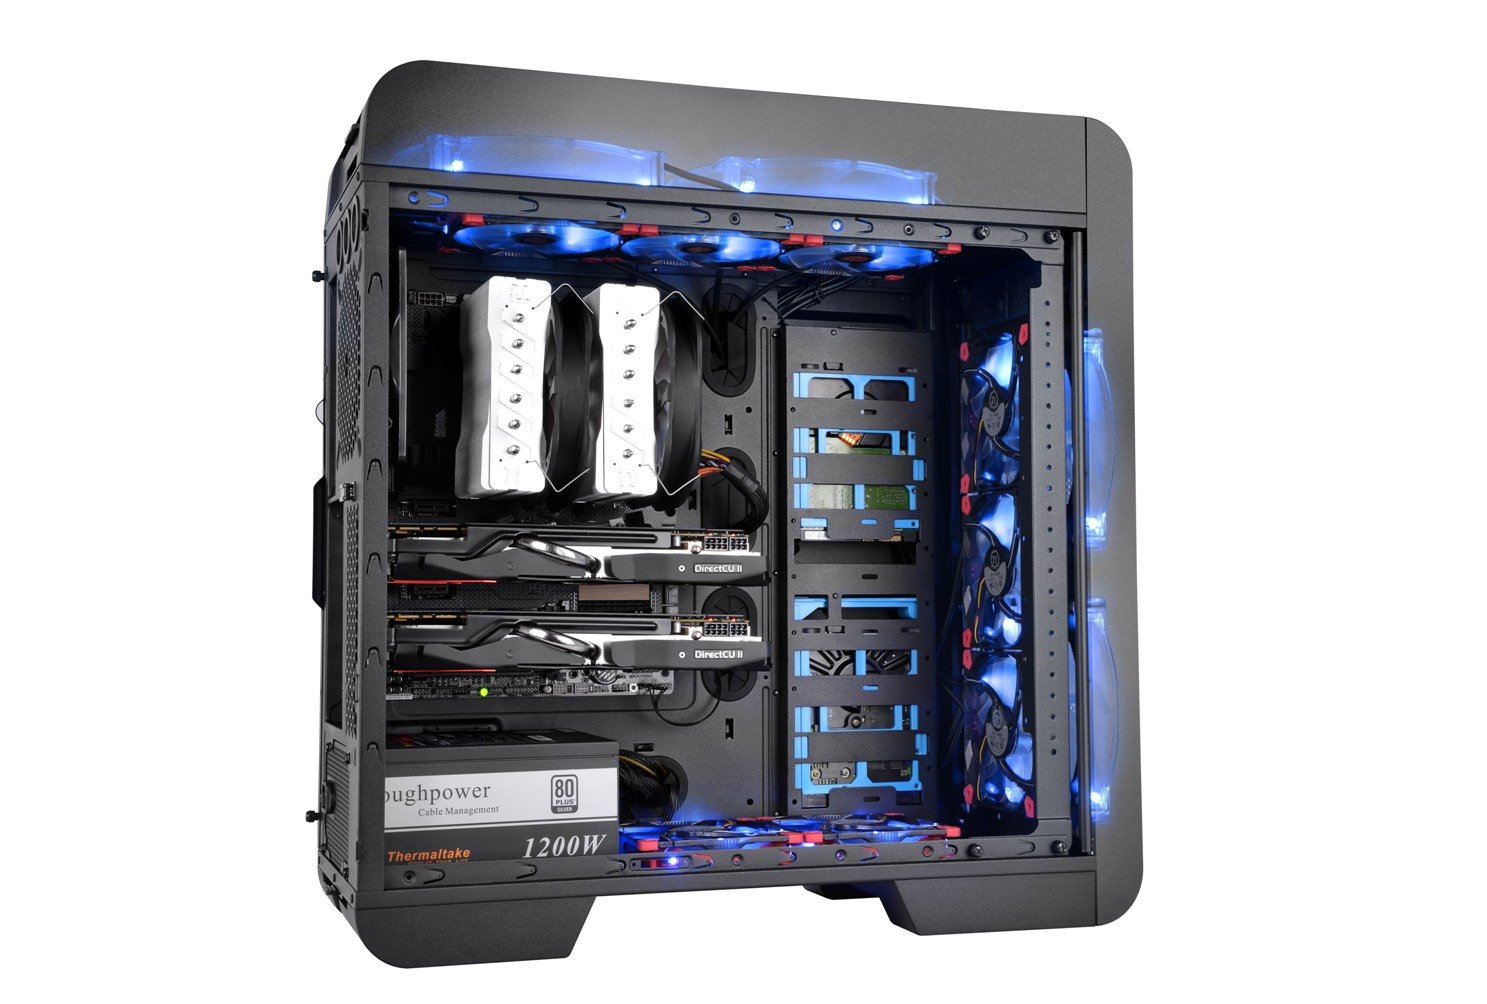 Thermaltake Core V71 full-tower case can be modified for superior liquid cooling or superb airflow through seamless operation